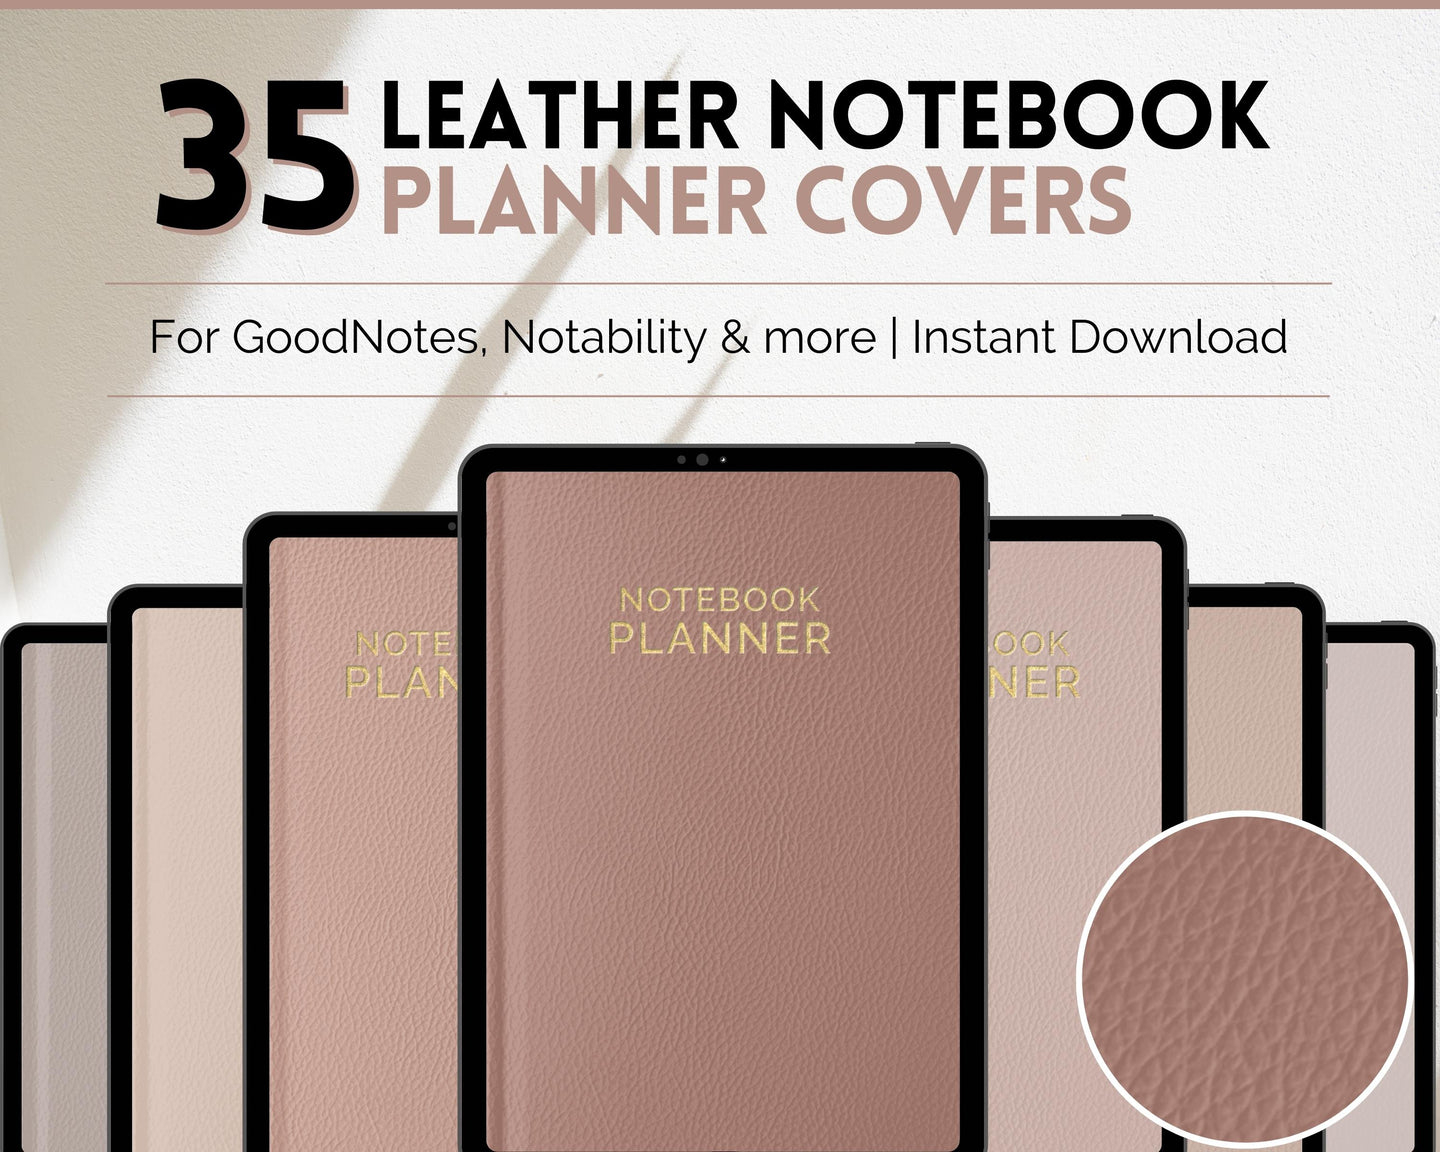 35 Digital Planner Notebook Covers | Digital Journal Covers for GoodNotes & iPad | Leather Texture Brown